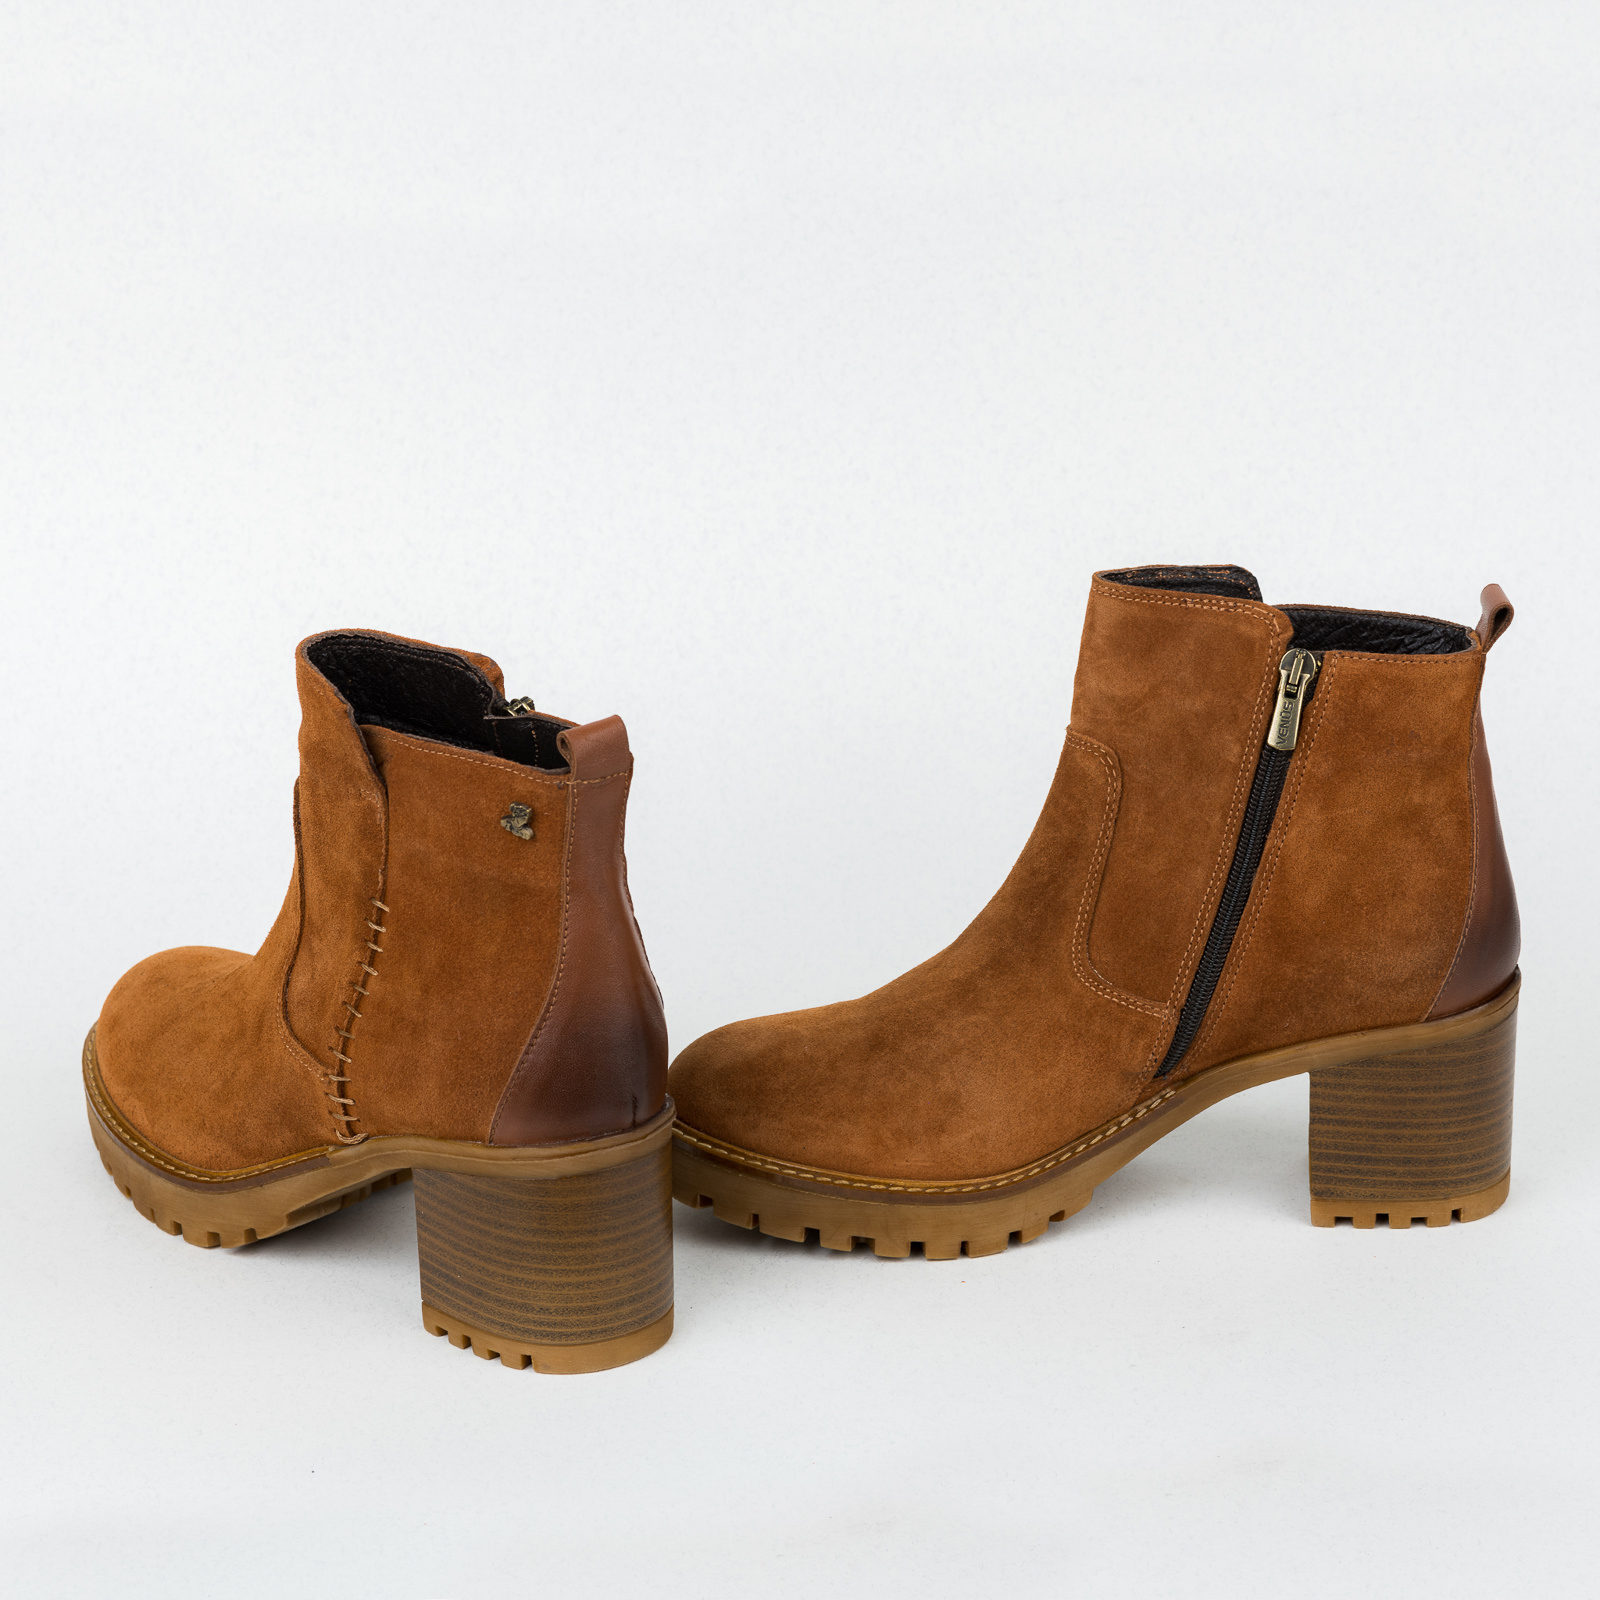 Leather ankle boots B436 - CAMEL